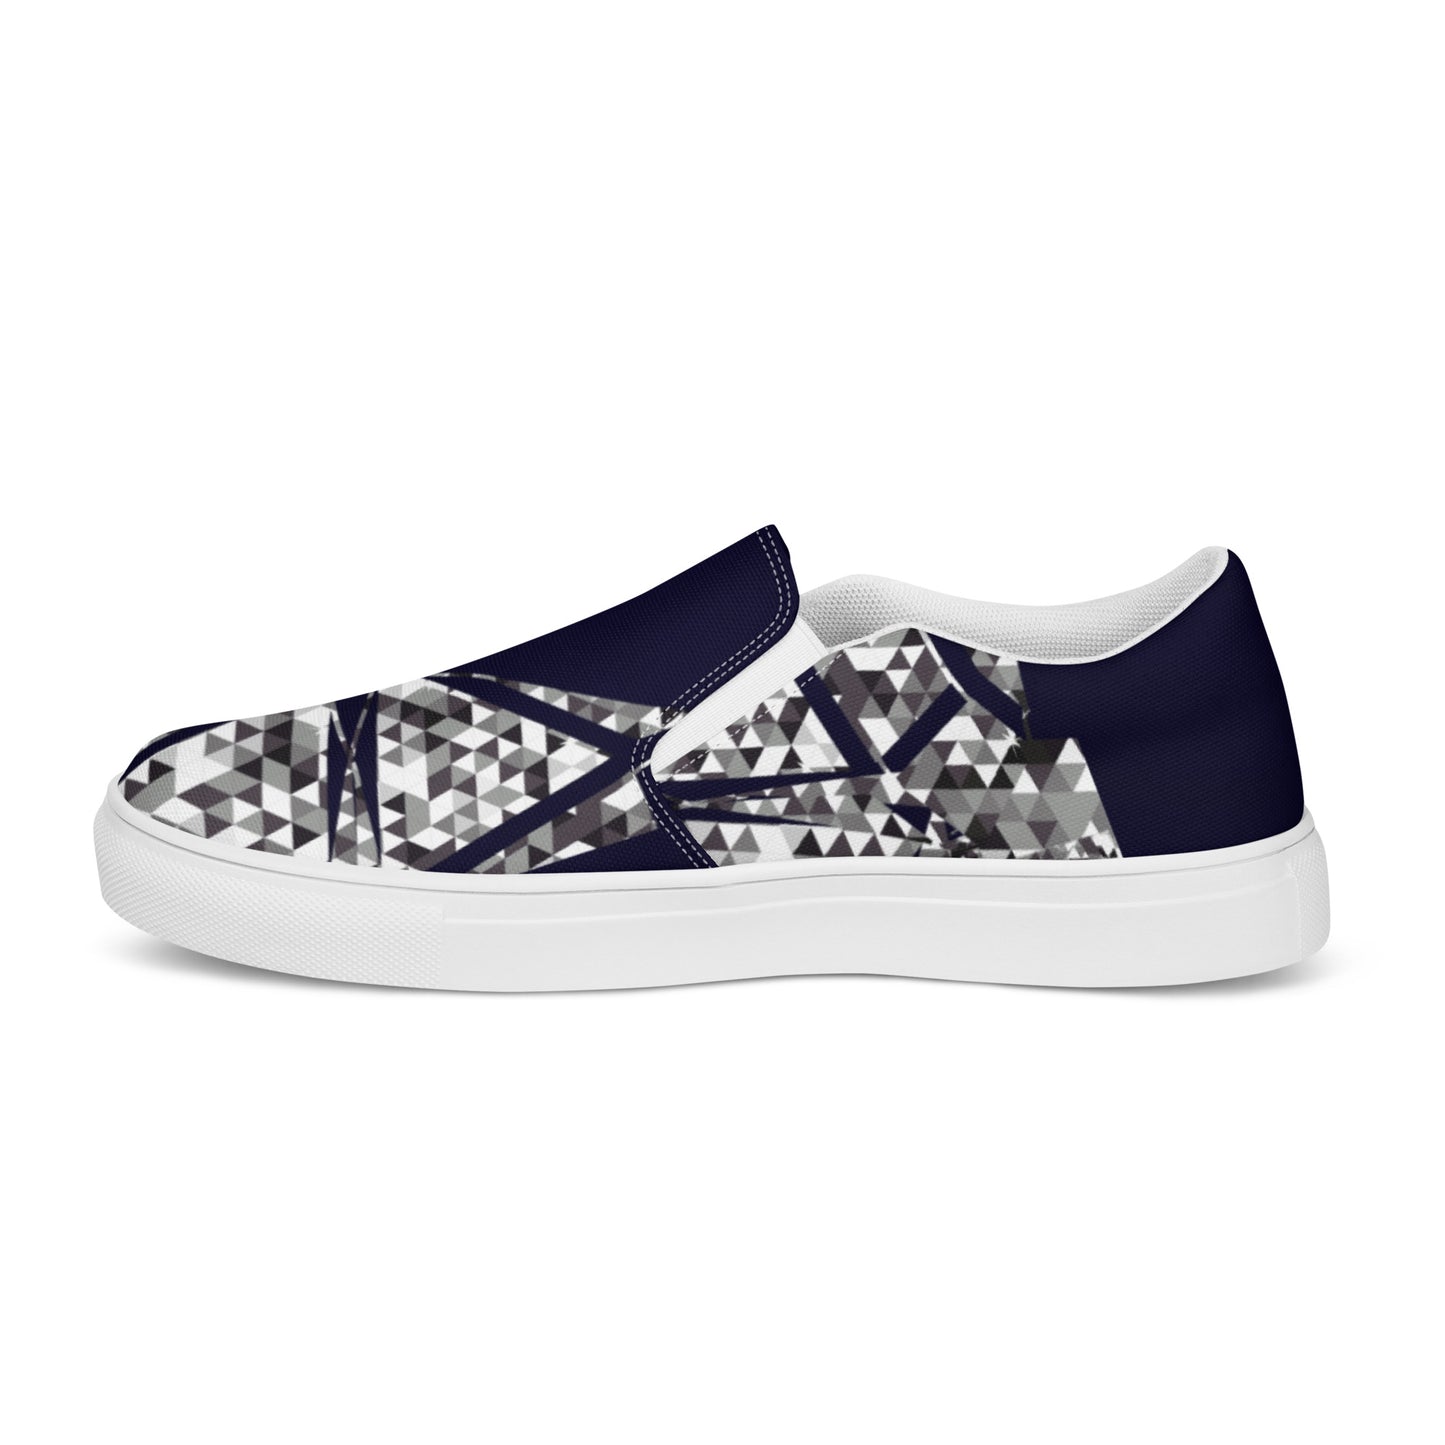 All glam slip-on sneakers